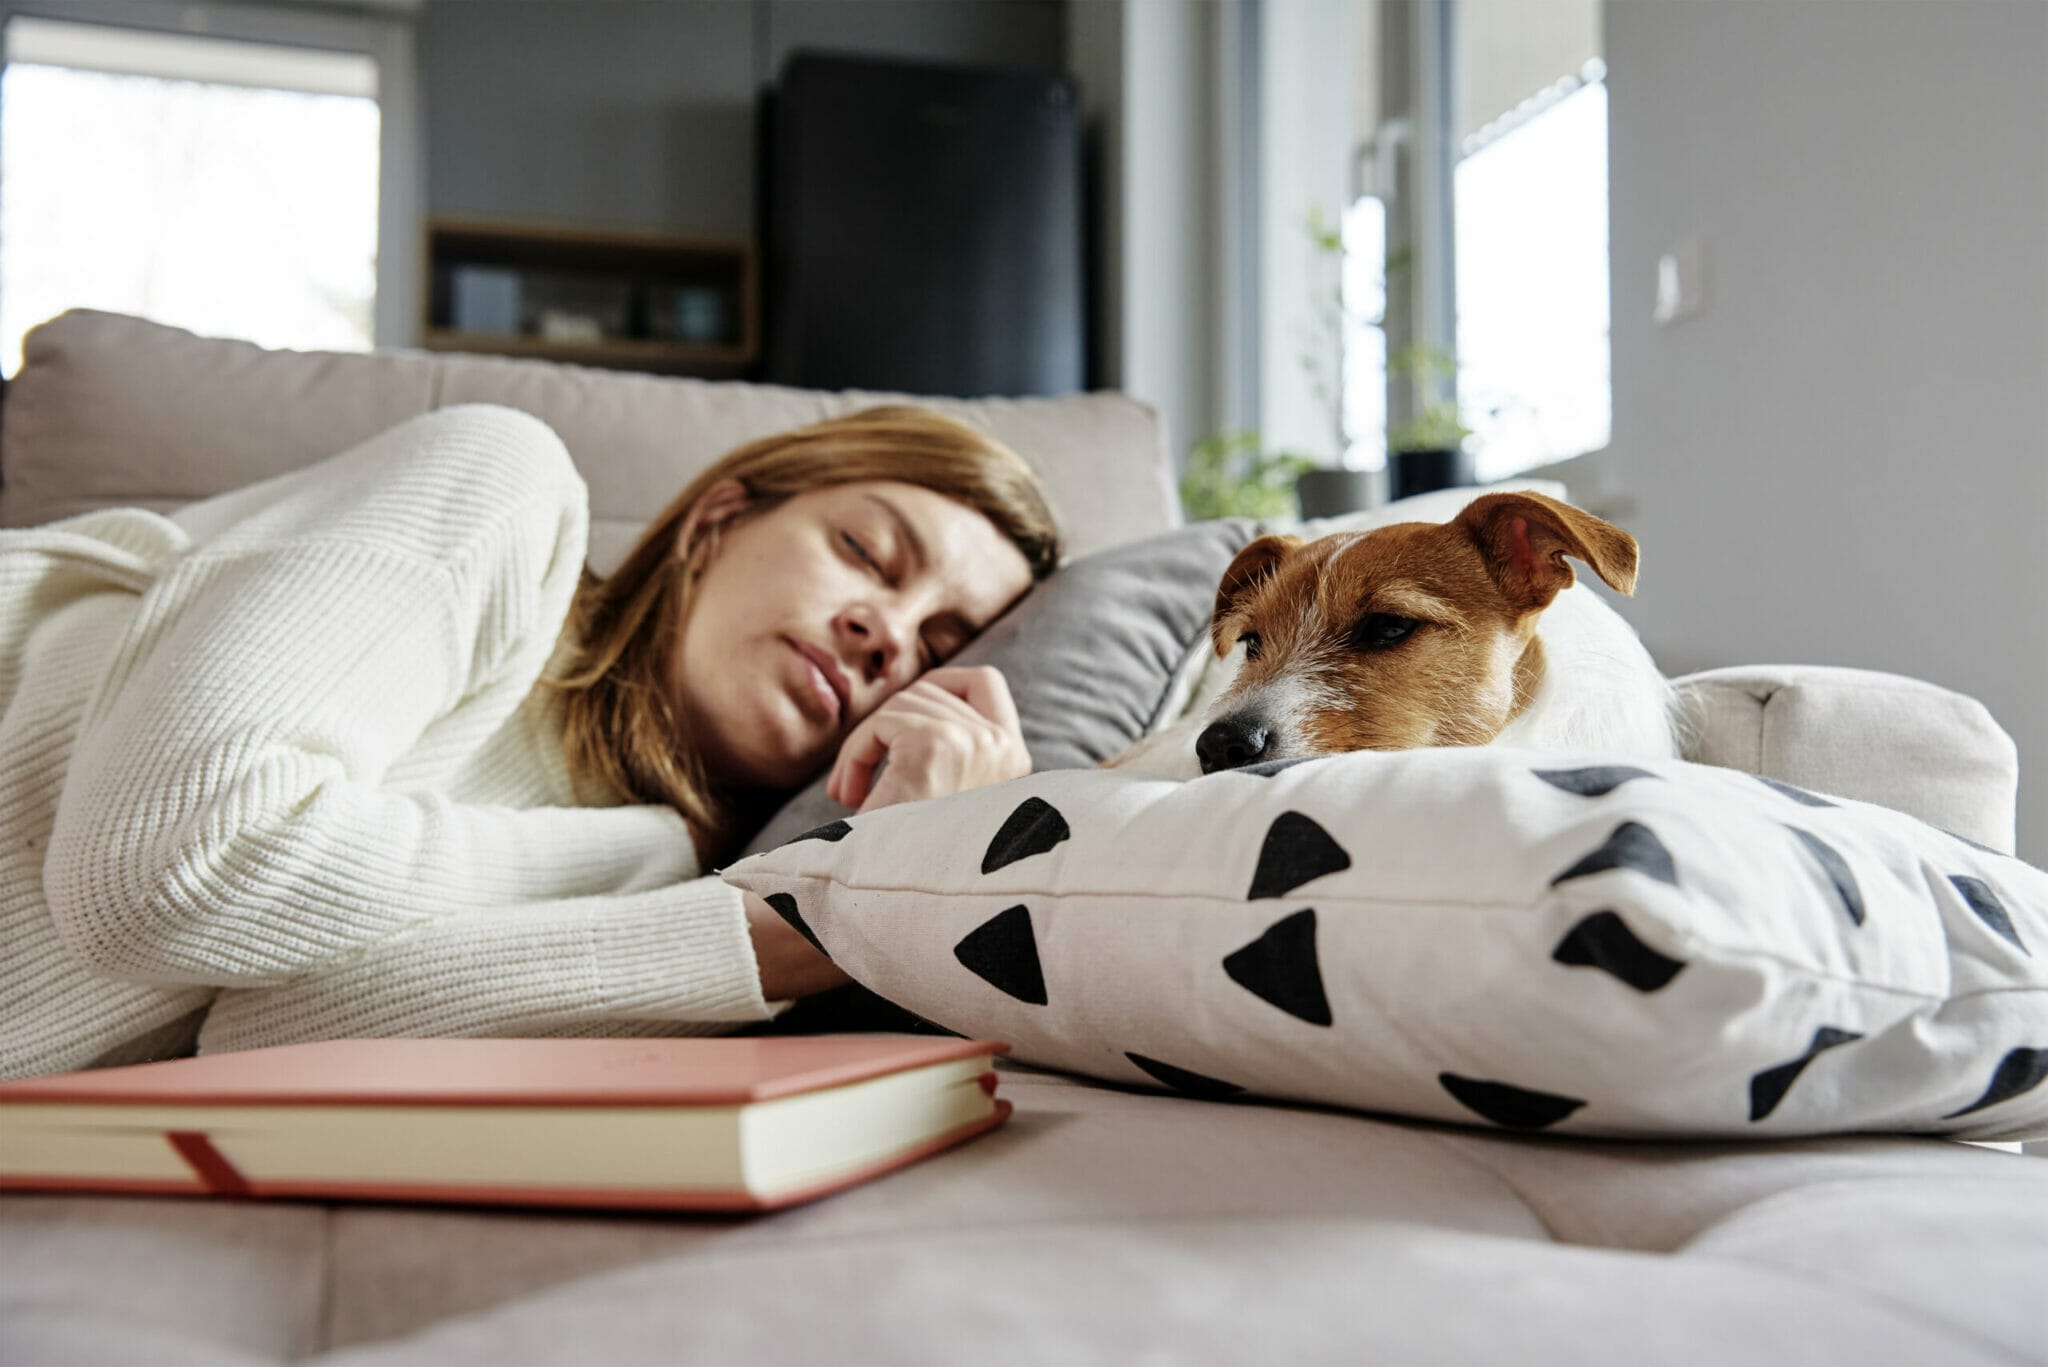 Which home remedy is optimal for your dog?